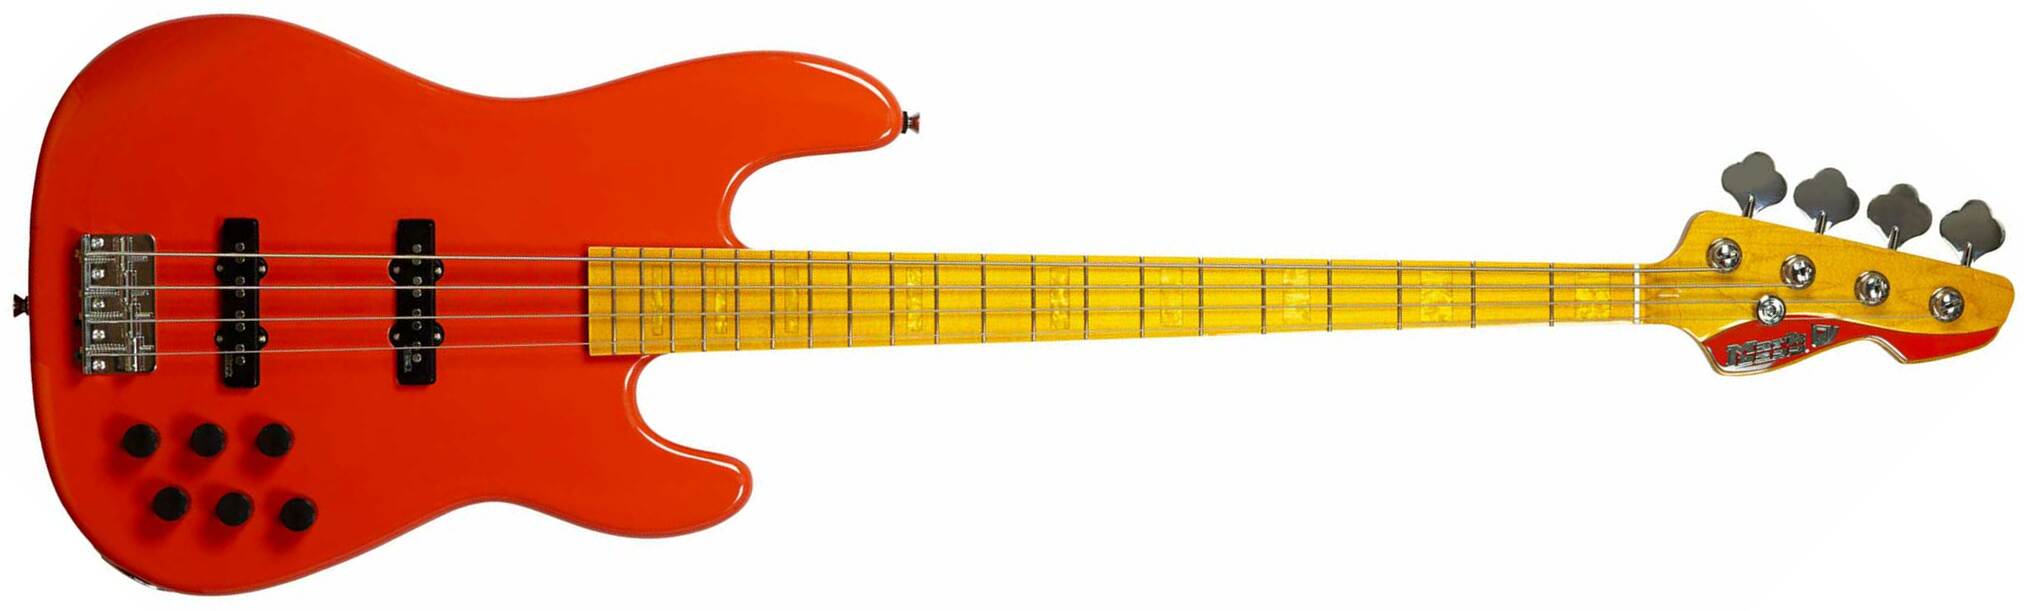 Markbass Mb Gv 4 Gloxy Val Cr Mp Active Mn - Fiesta Red - Basse Électrique Solid Body - Main picture